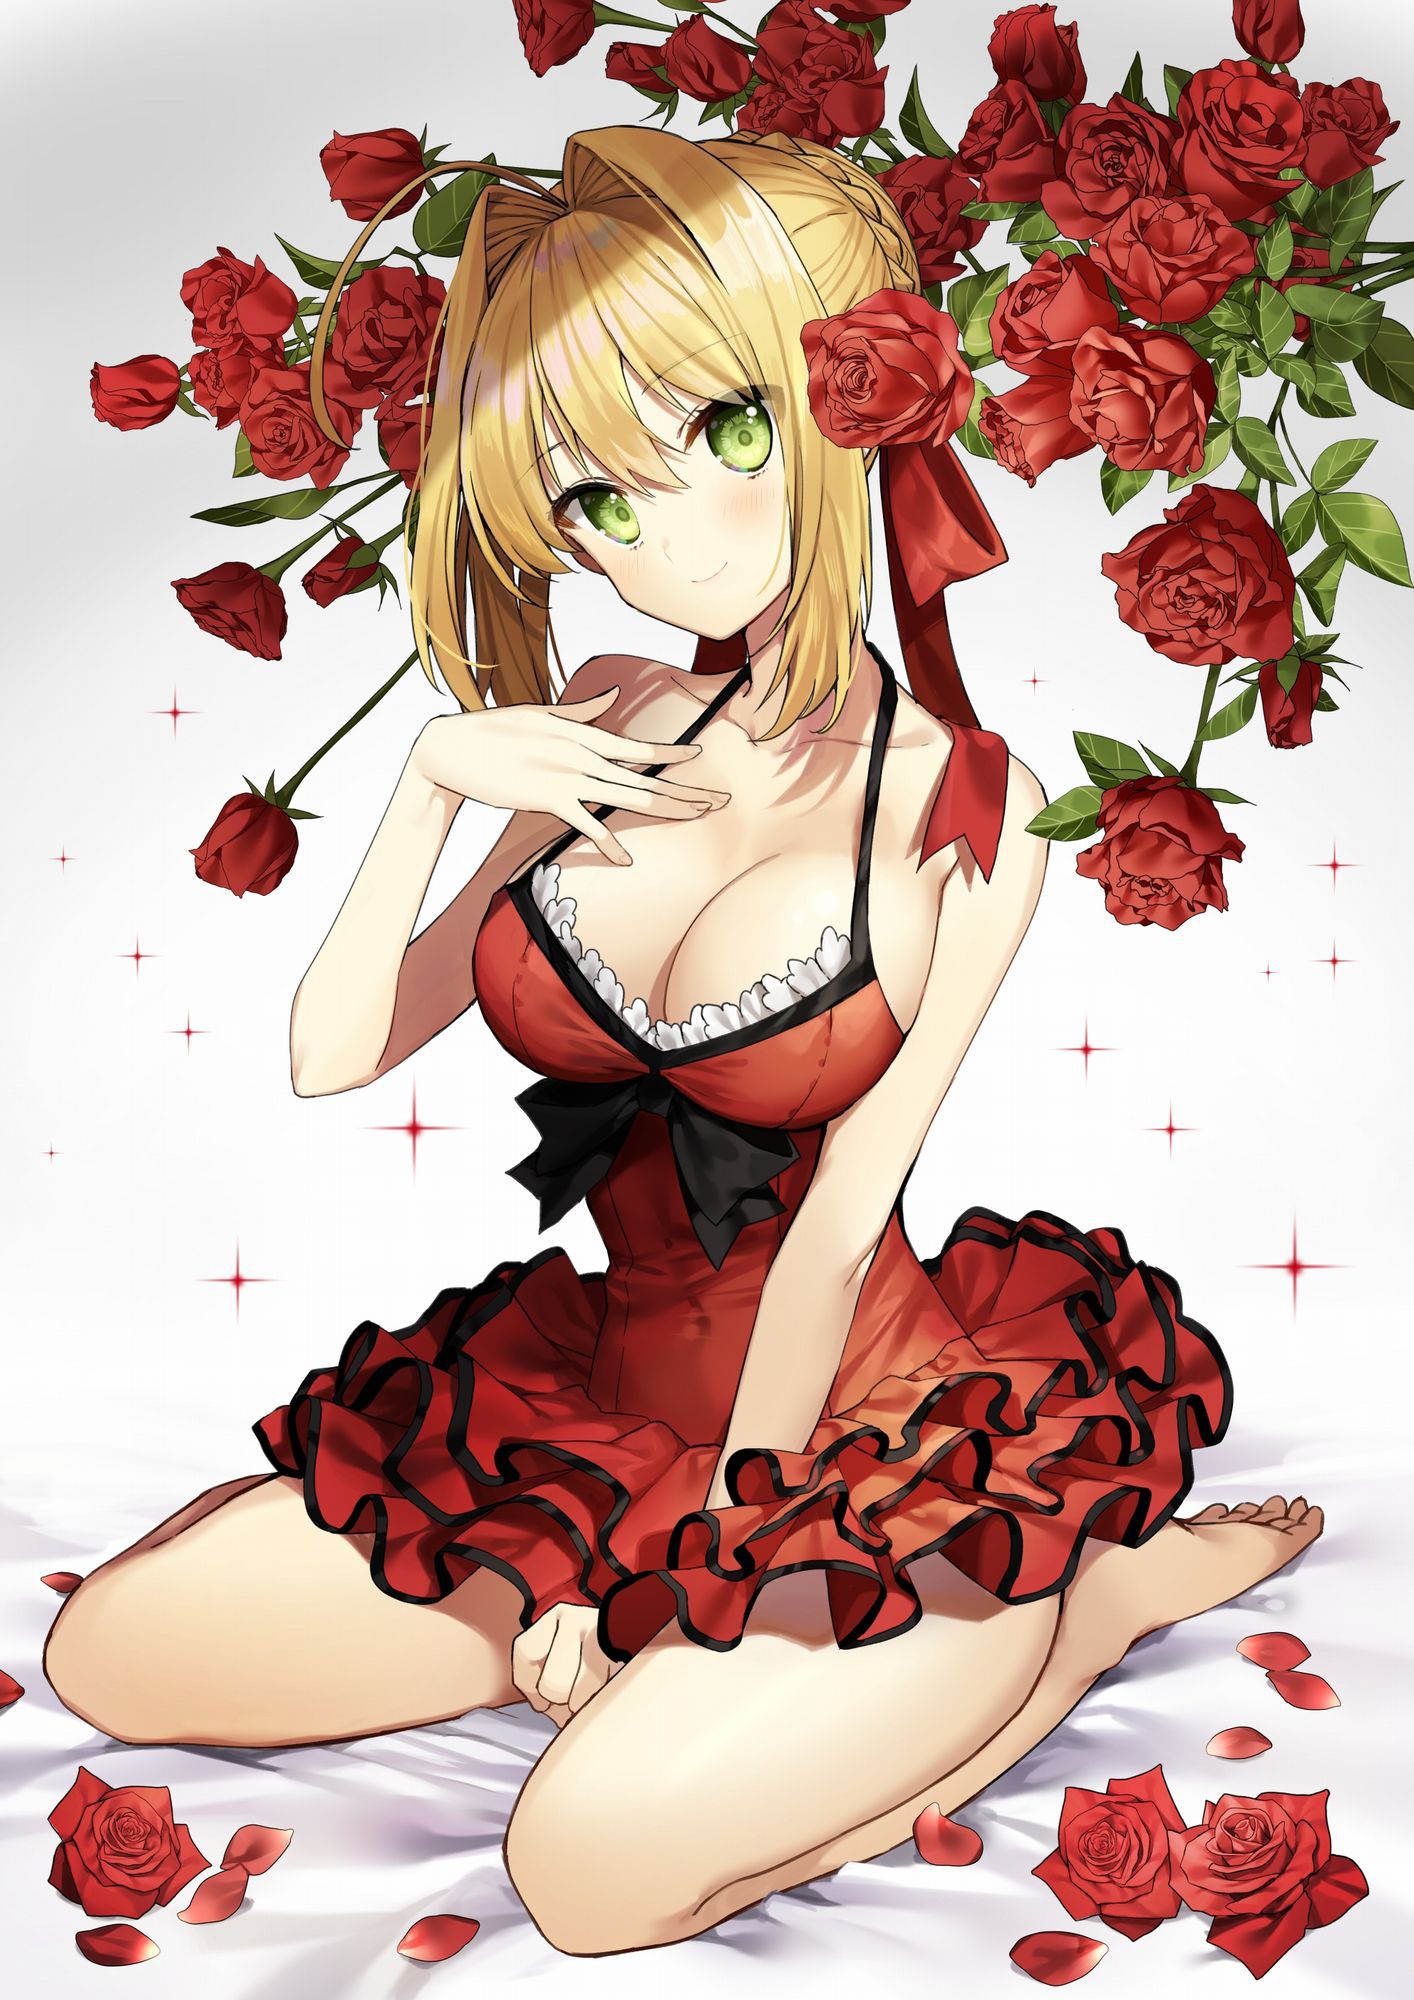 [Secondary ZIP] is about to start anime 100 pieces of cute image summary of Nero Claudius so soon 70